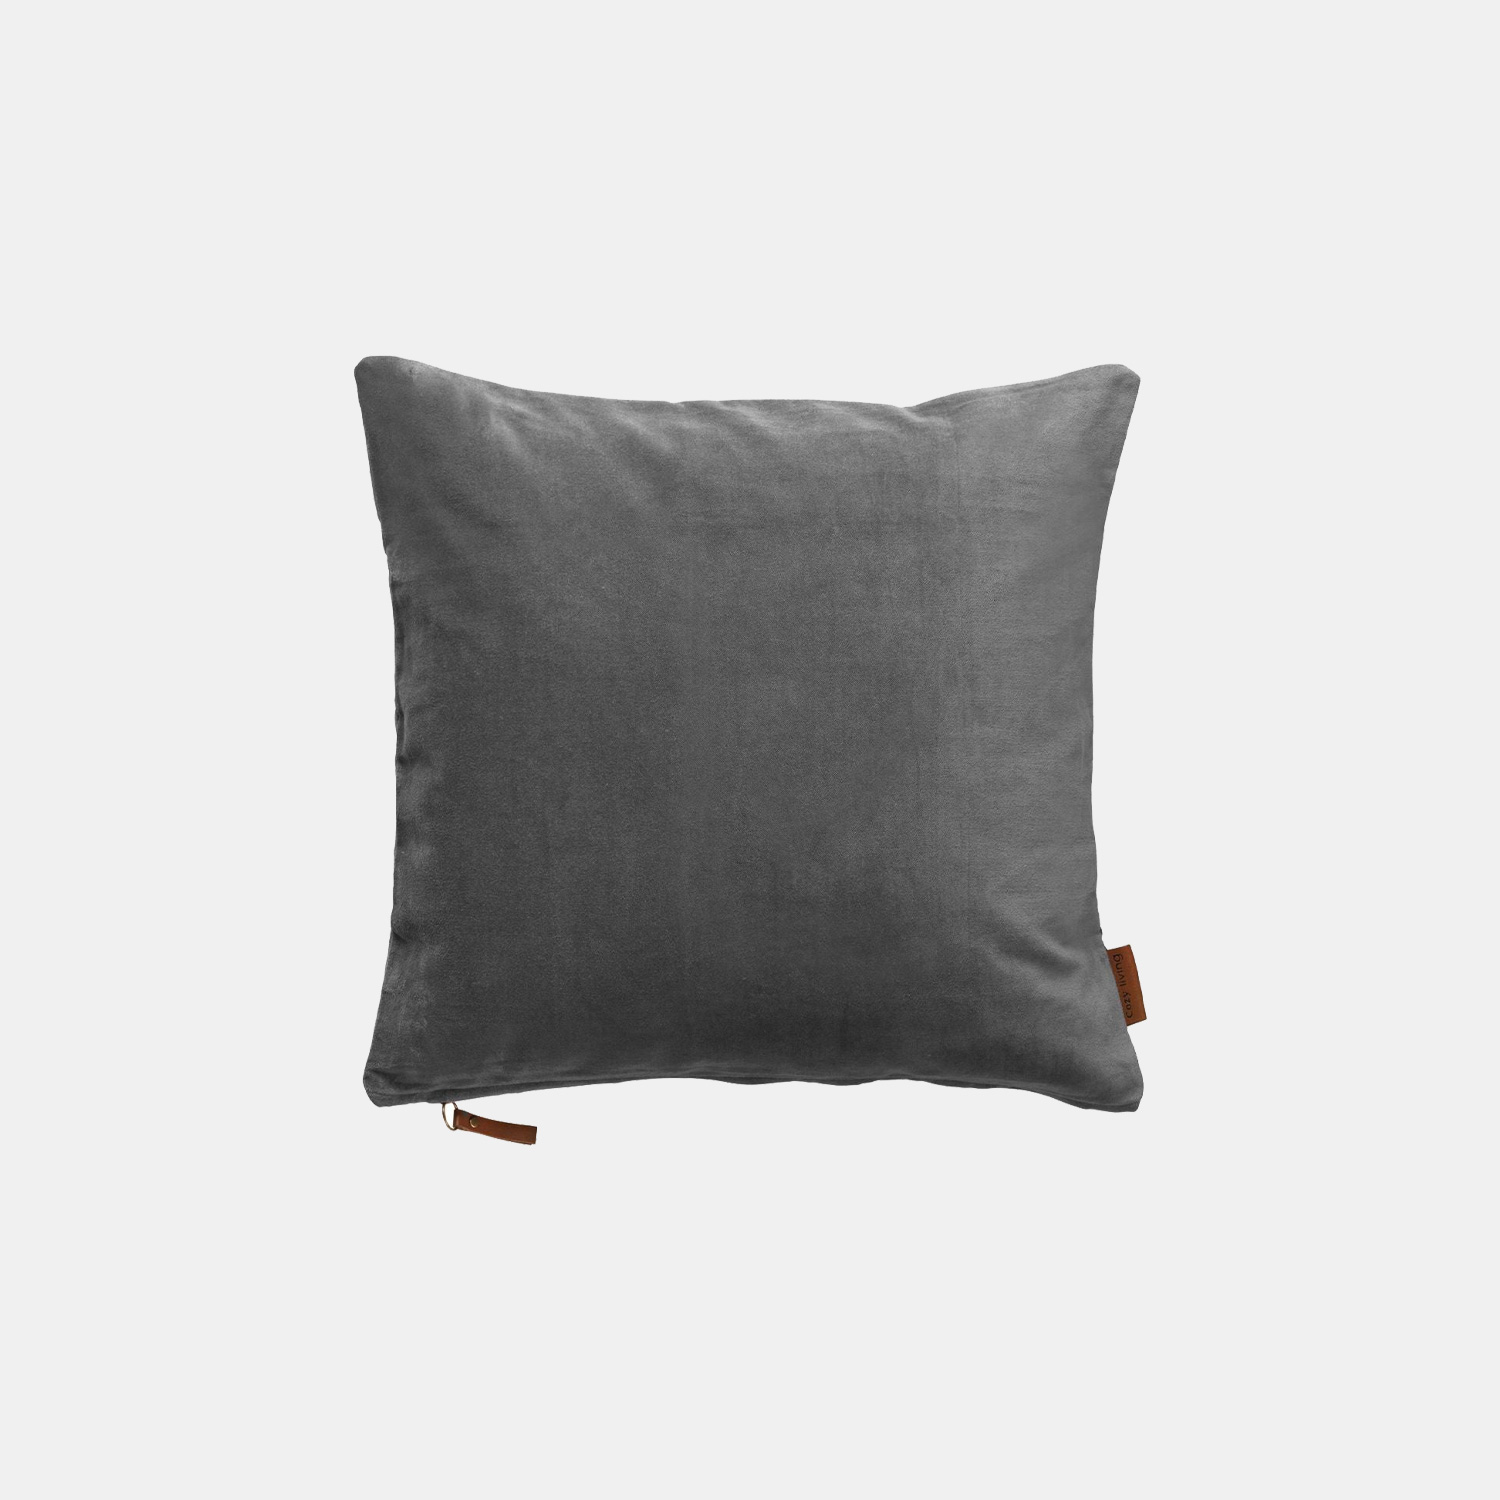 Only The Comfiest Cushions Made This Collection - Shop Cushions & Throws At BF Home